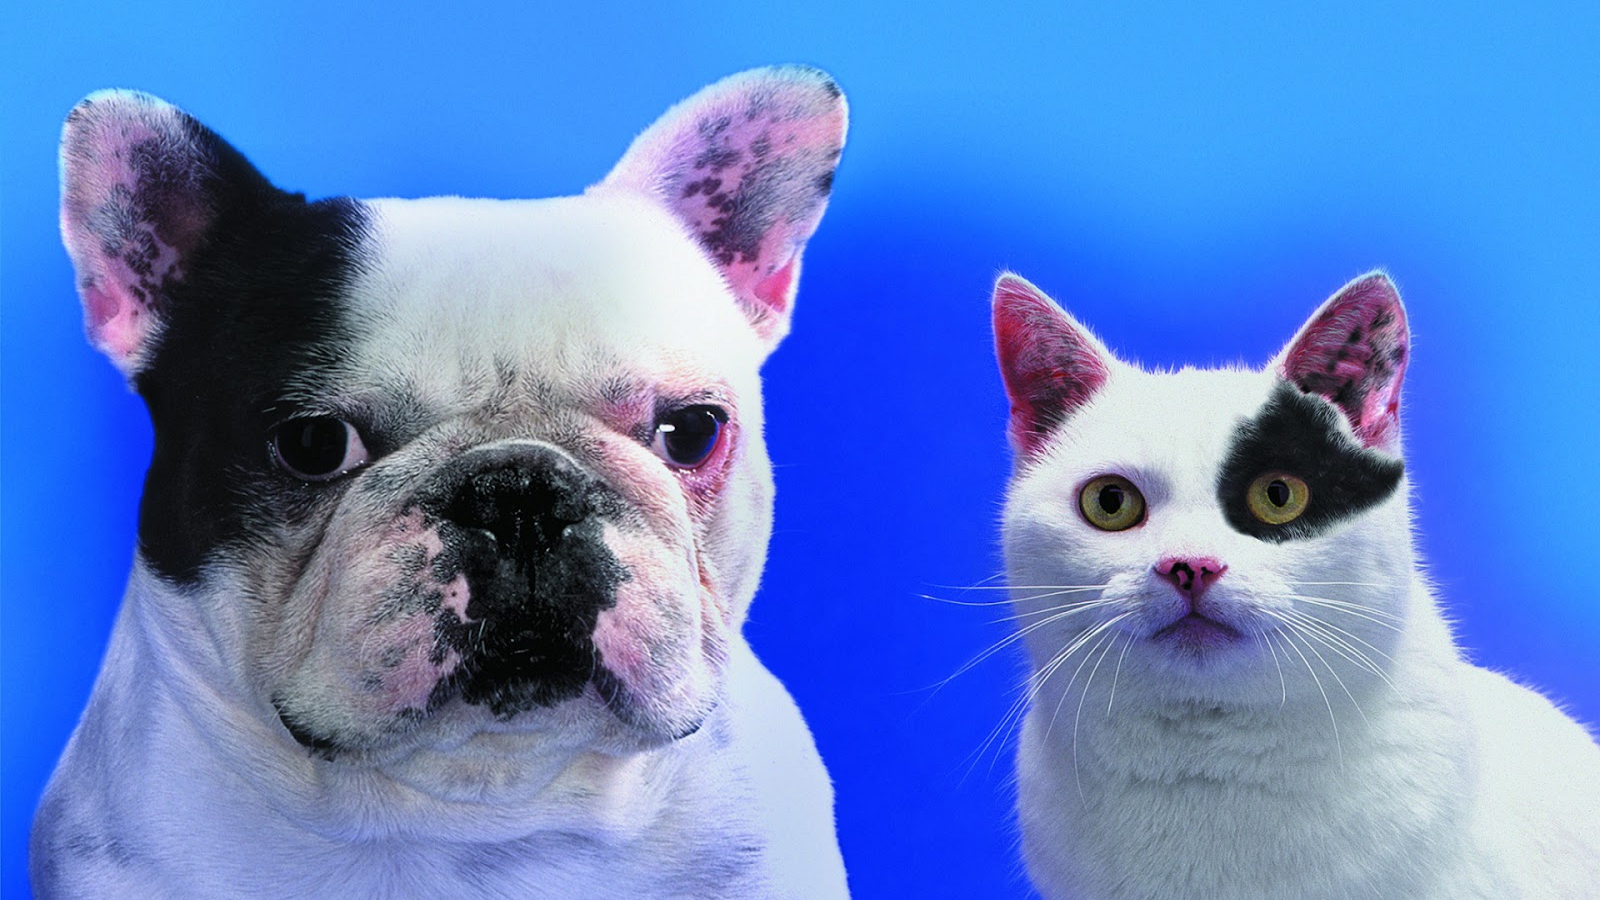 Funny cat and dog wallpaper download